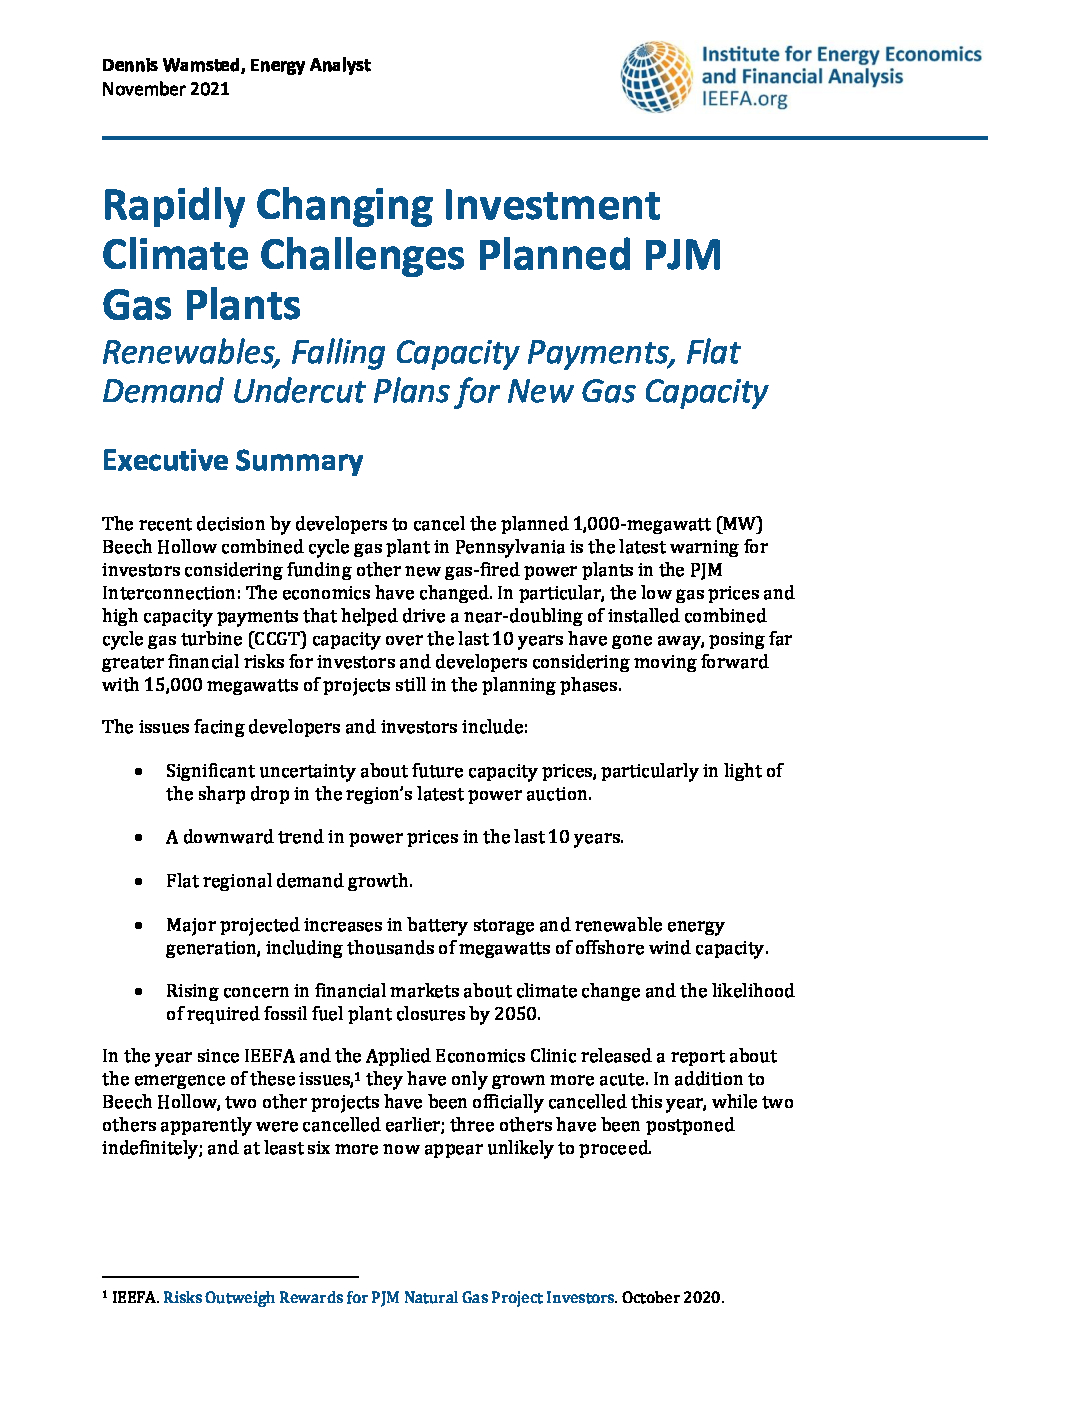 Rapidly Changing Investment Climate Challenges Planned PJM Gas Plants_November 2021